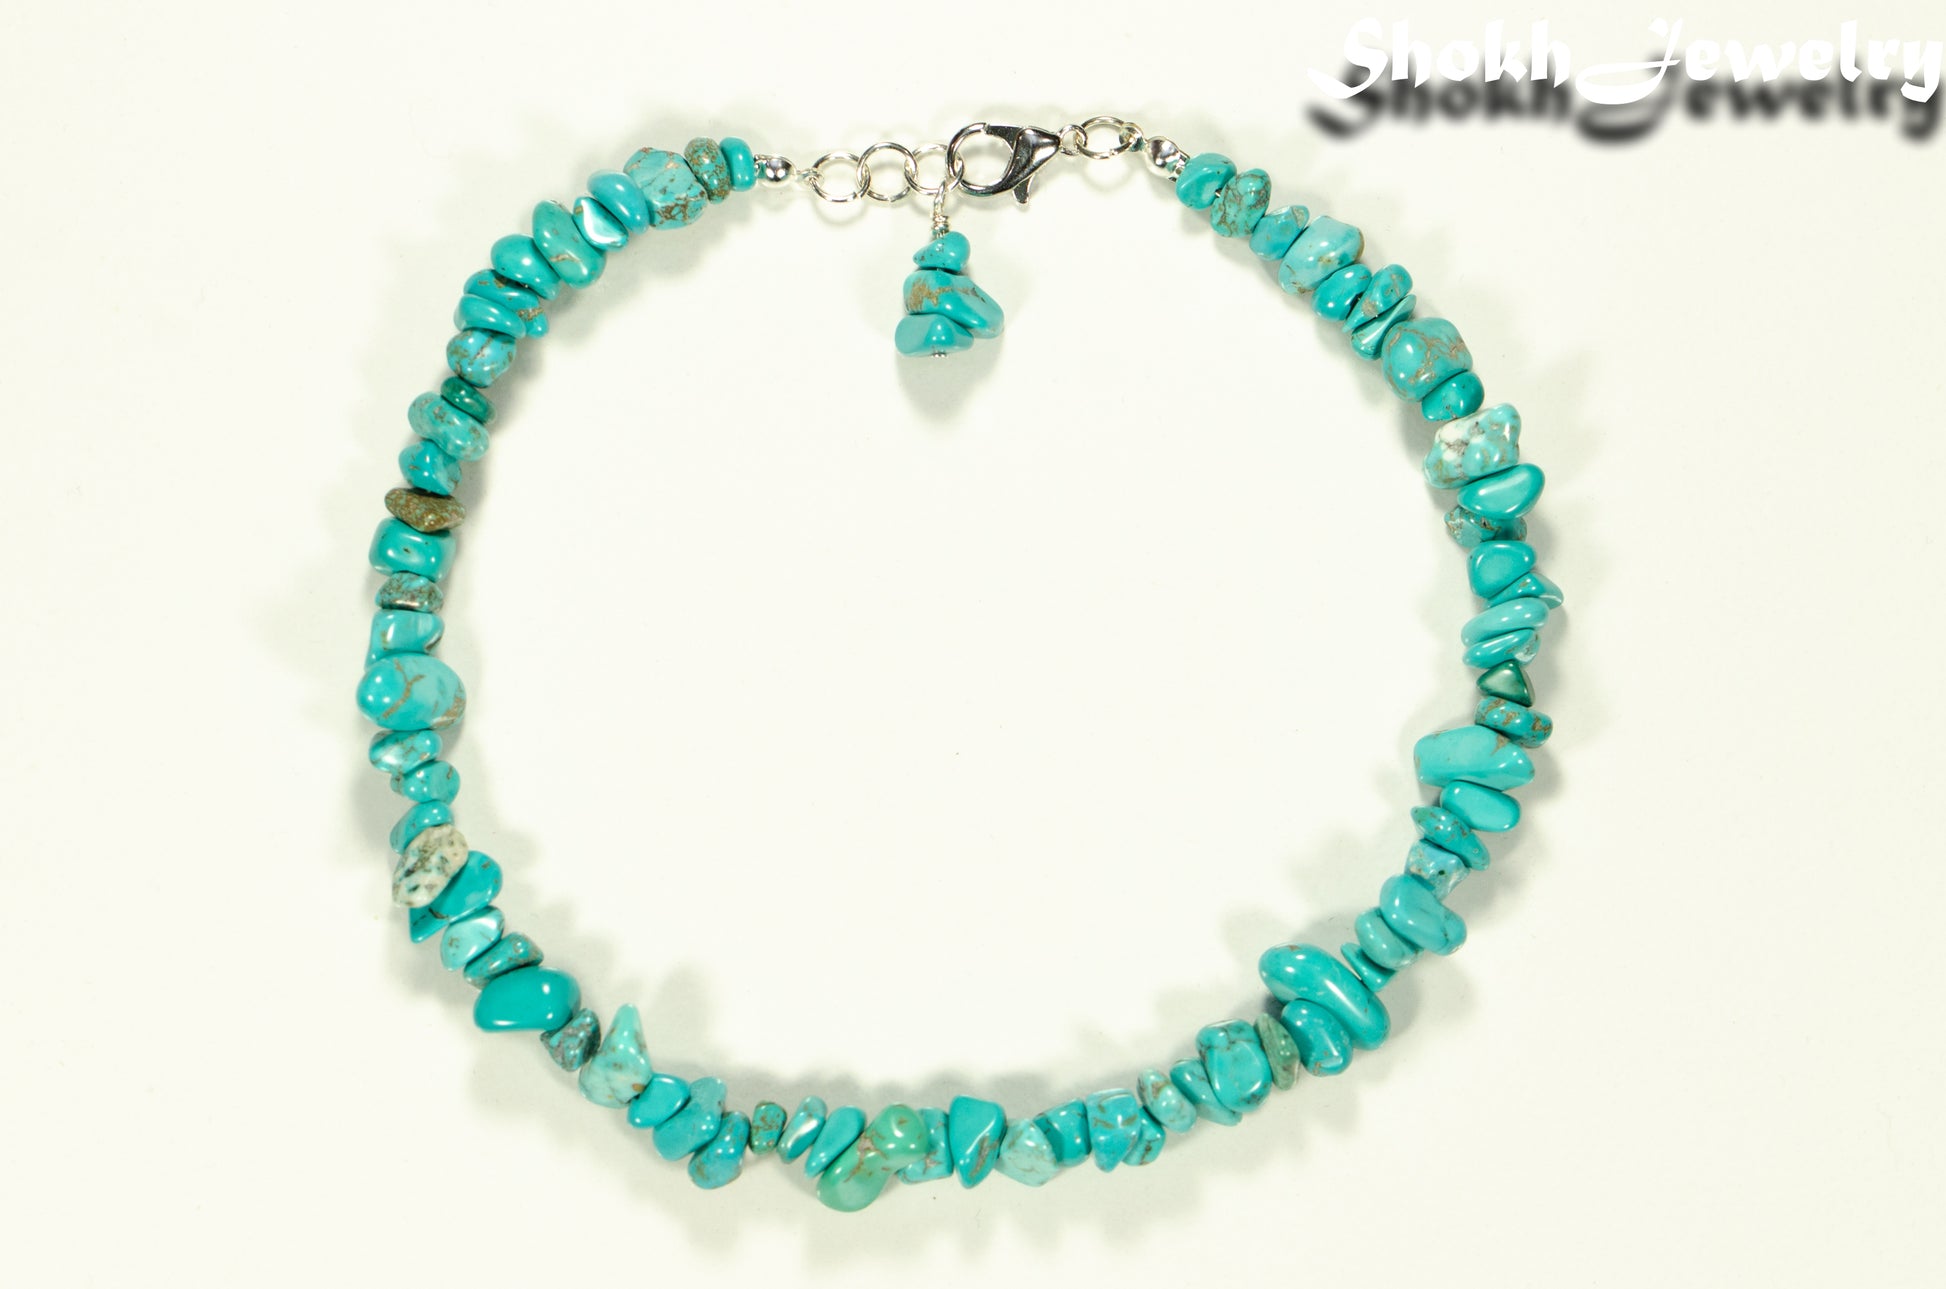 Top view of Natural Turquoise Crystal Chip Choker Necklace.